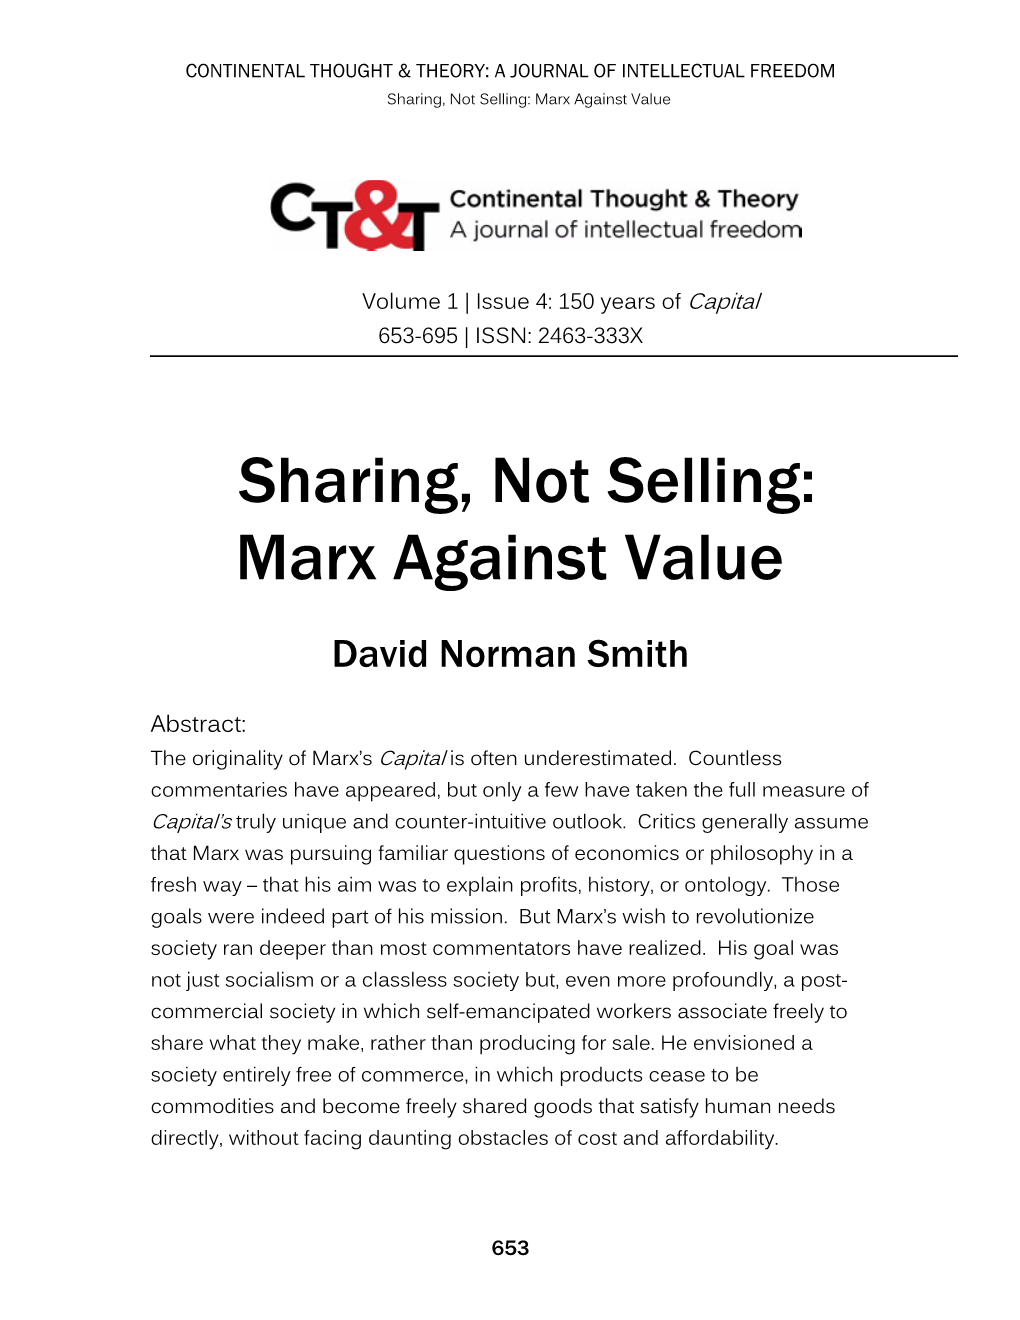 Sharing, Not Selling: Marx Against Value